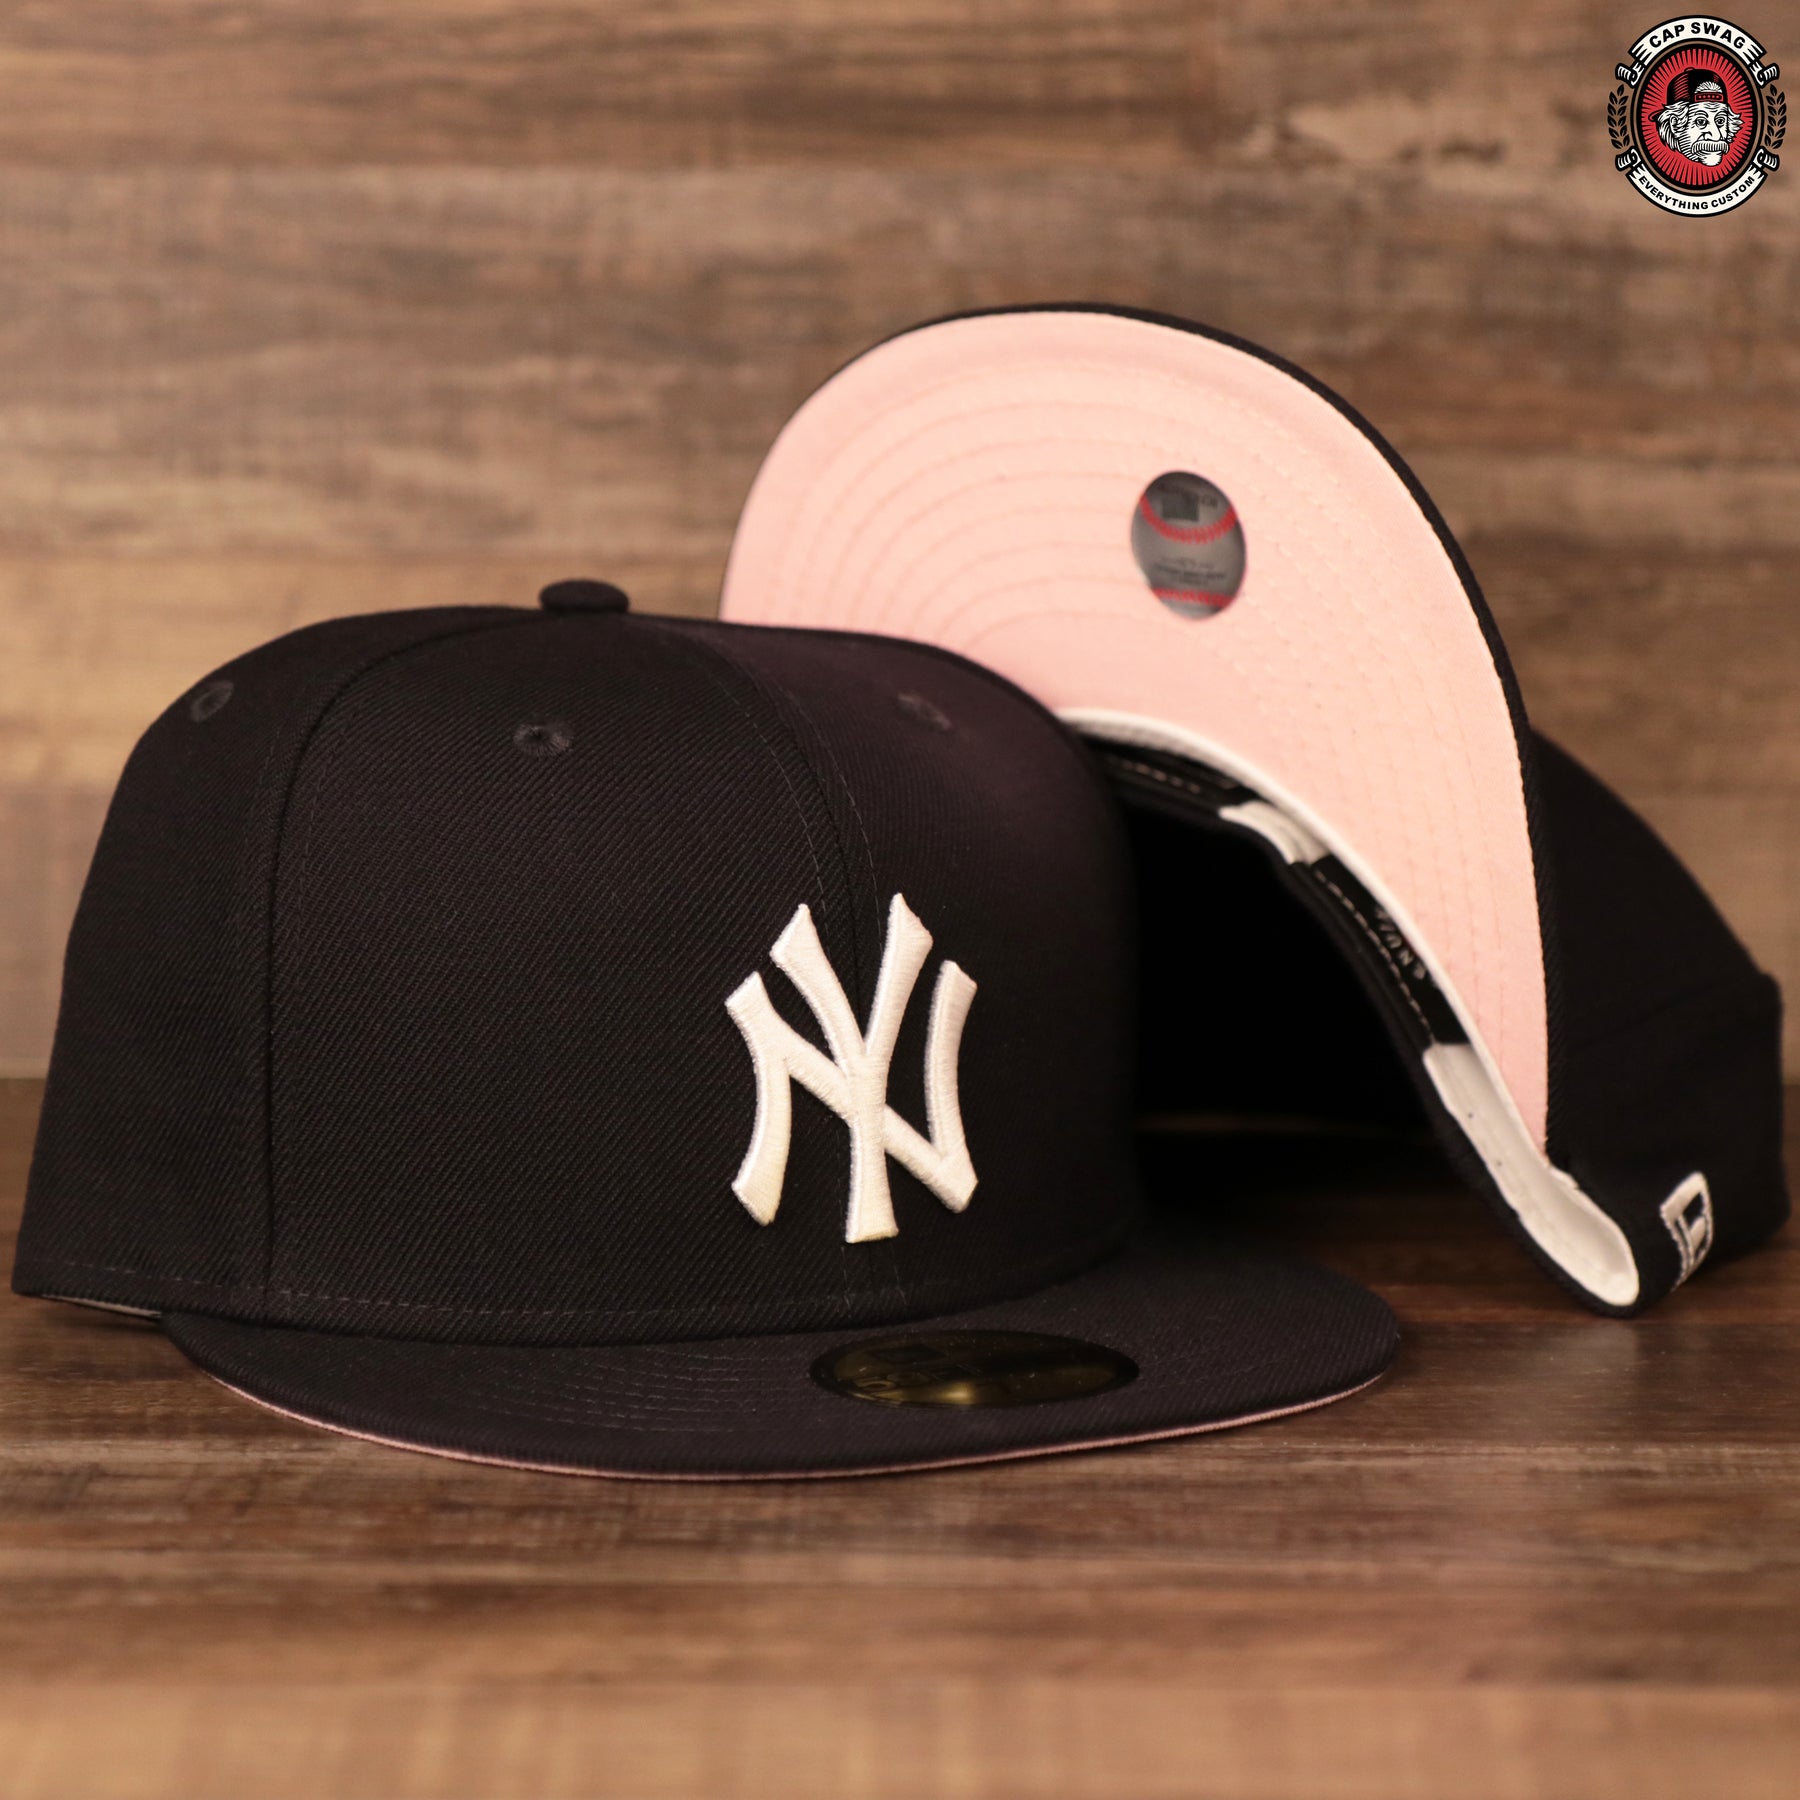 Pink Bottom Fitted Hat 59fifty Pink Under Brim Yankees Fitted Cap Cap Swag